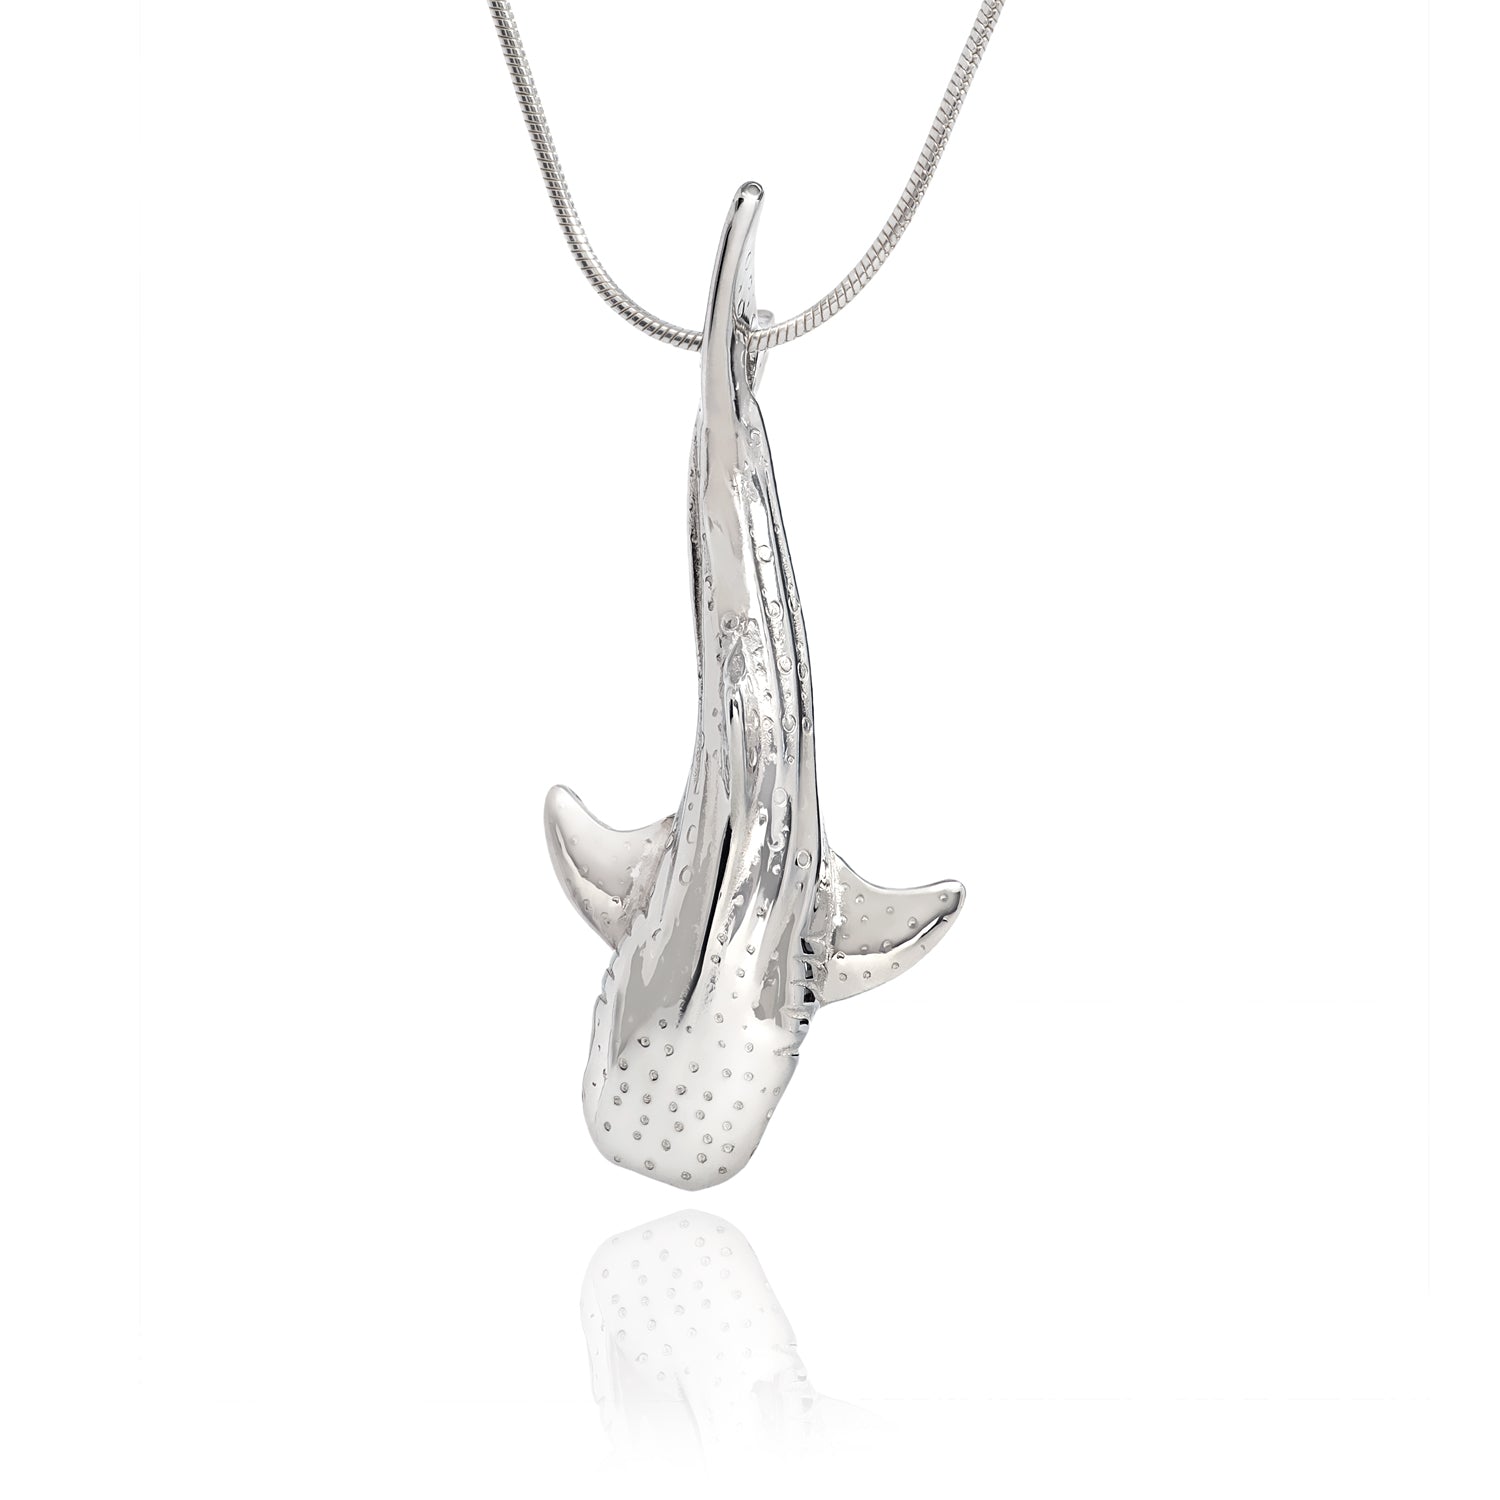 Whale Shark Necklace Charm for Women- Whale Shark Sterling Silver Jewelry, Shark Gifts for Shark Lovers, Scuba Diving Gifts, Scuba Diving Jewelry - The Tool Store